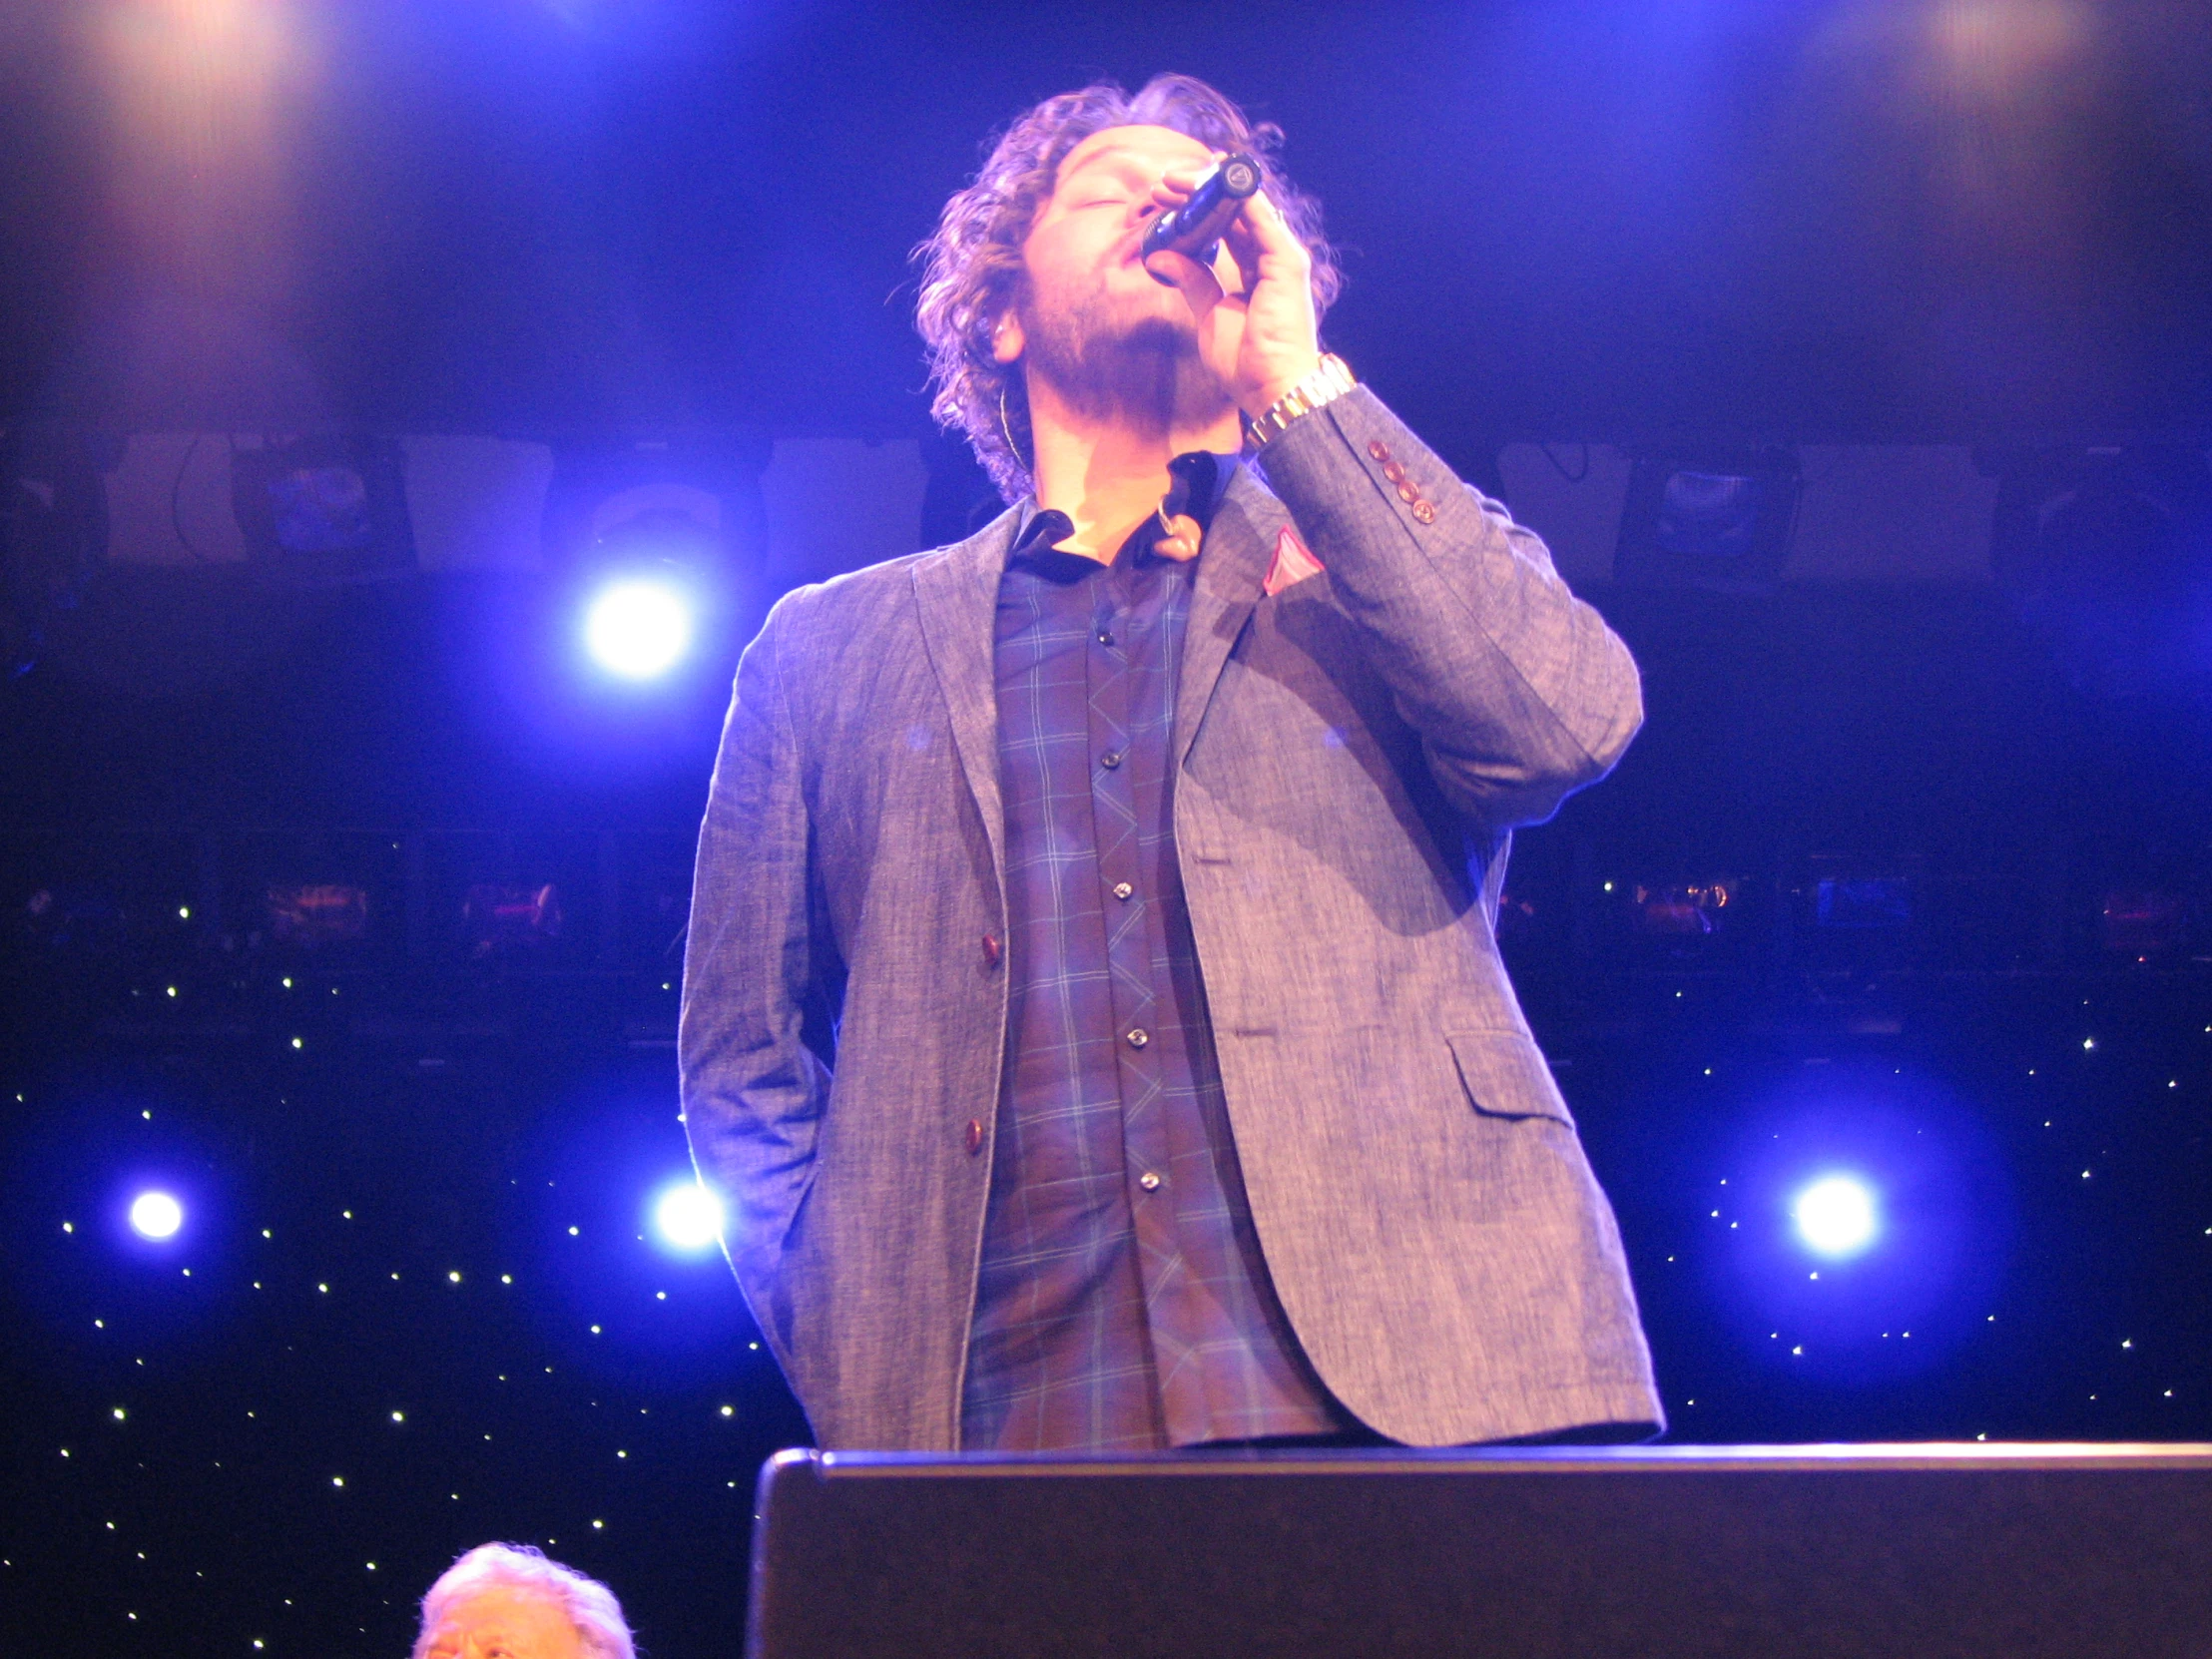 a man on stage wearing a gray jacket and blue shirt with his hands over his face